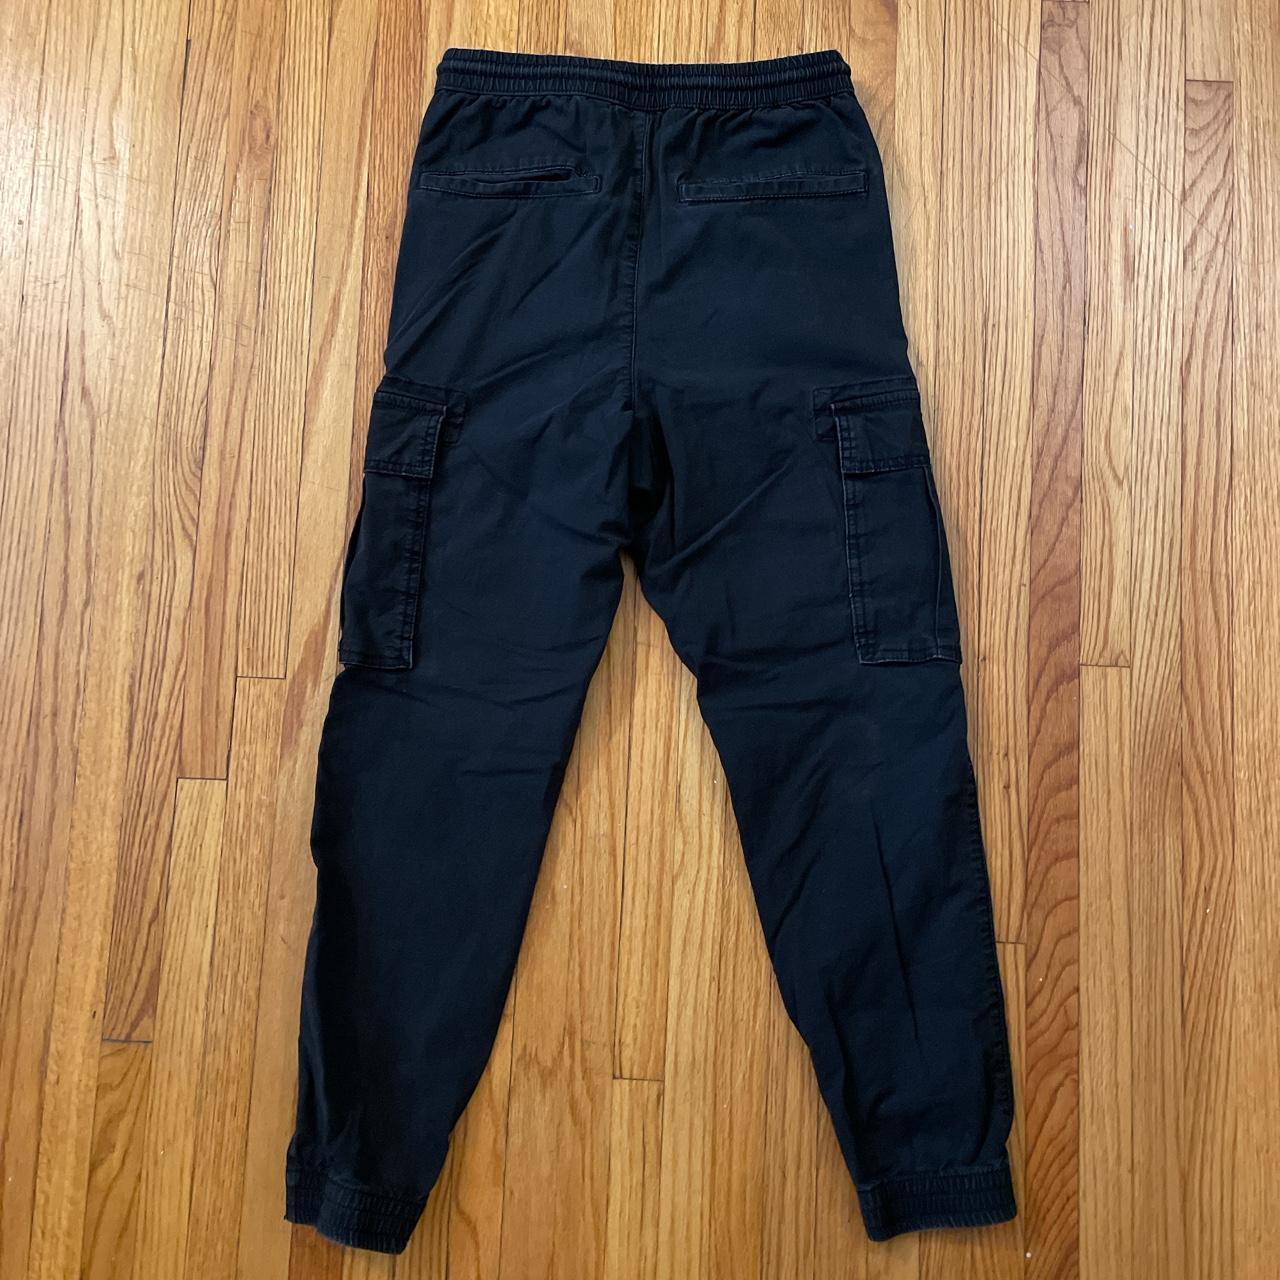 Goodfellow and Co by Target cargo jogger pants size... - Depop